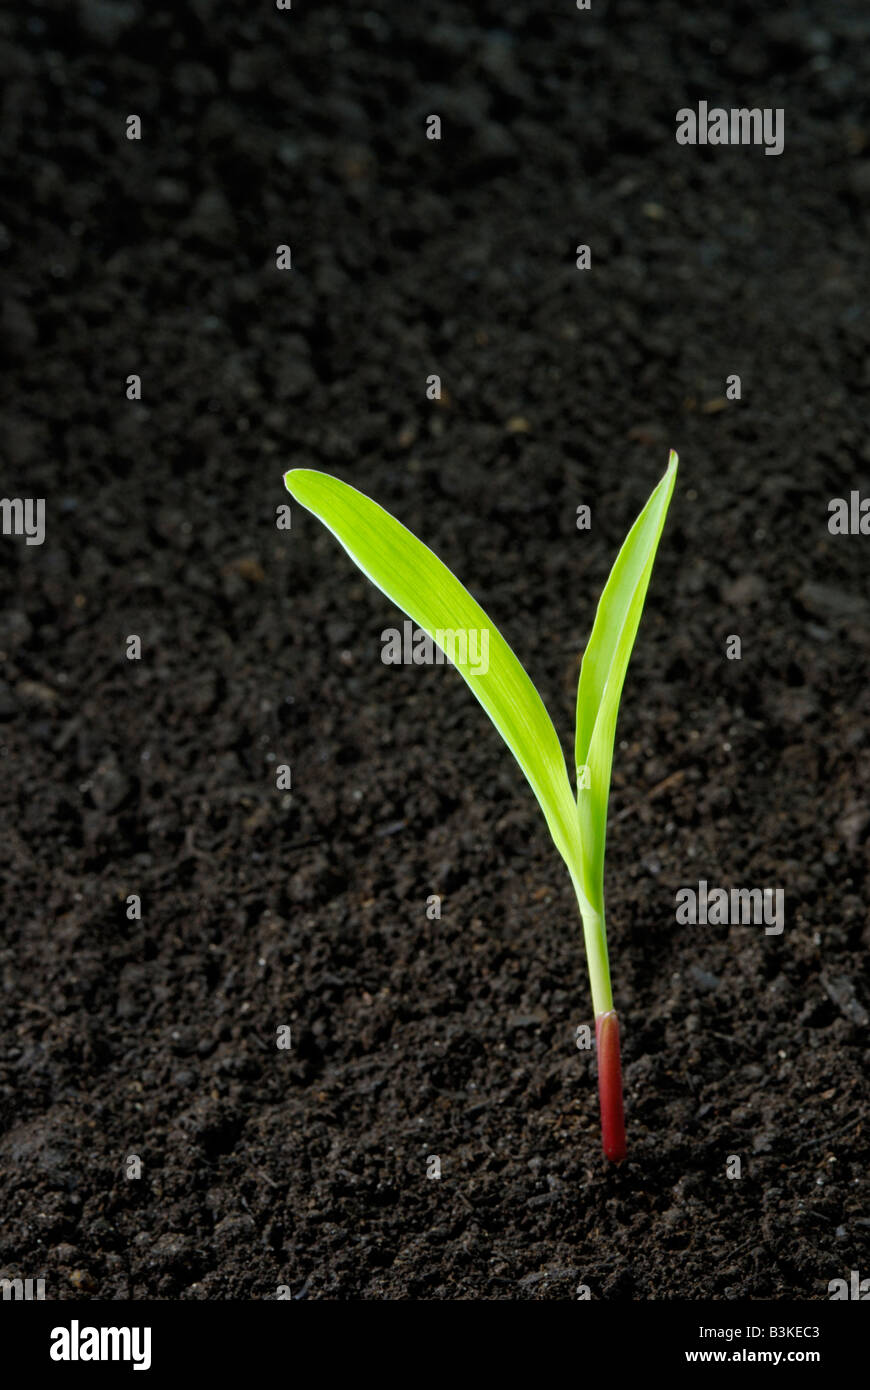 Corn seedling, Zea mays, emerging from dark soil The plant is 1-2 weeks old. Stock Photo